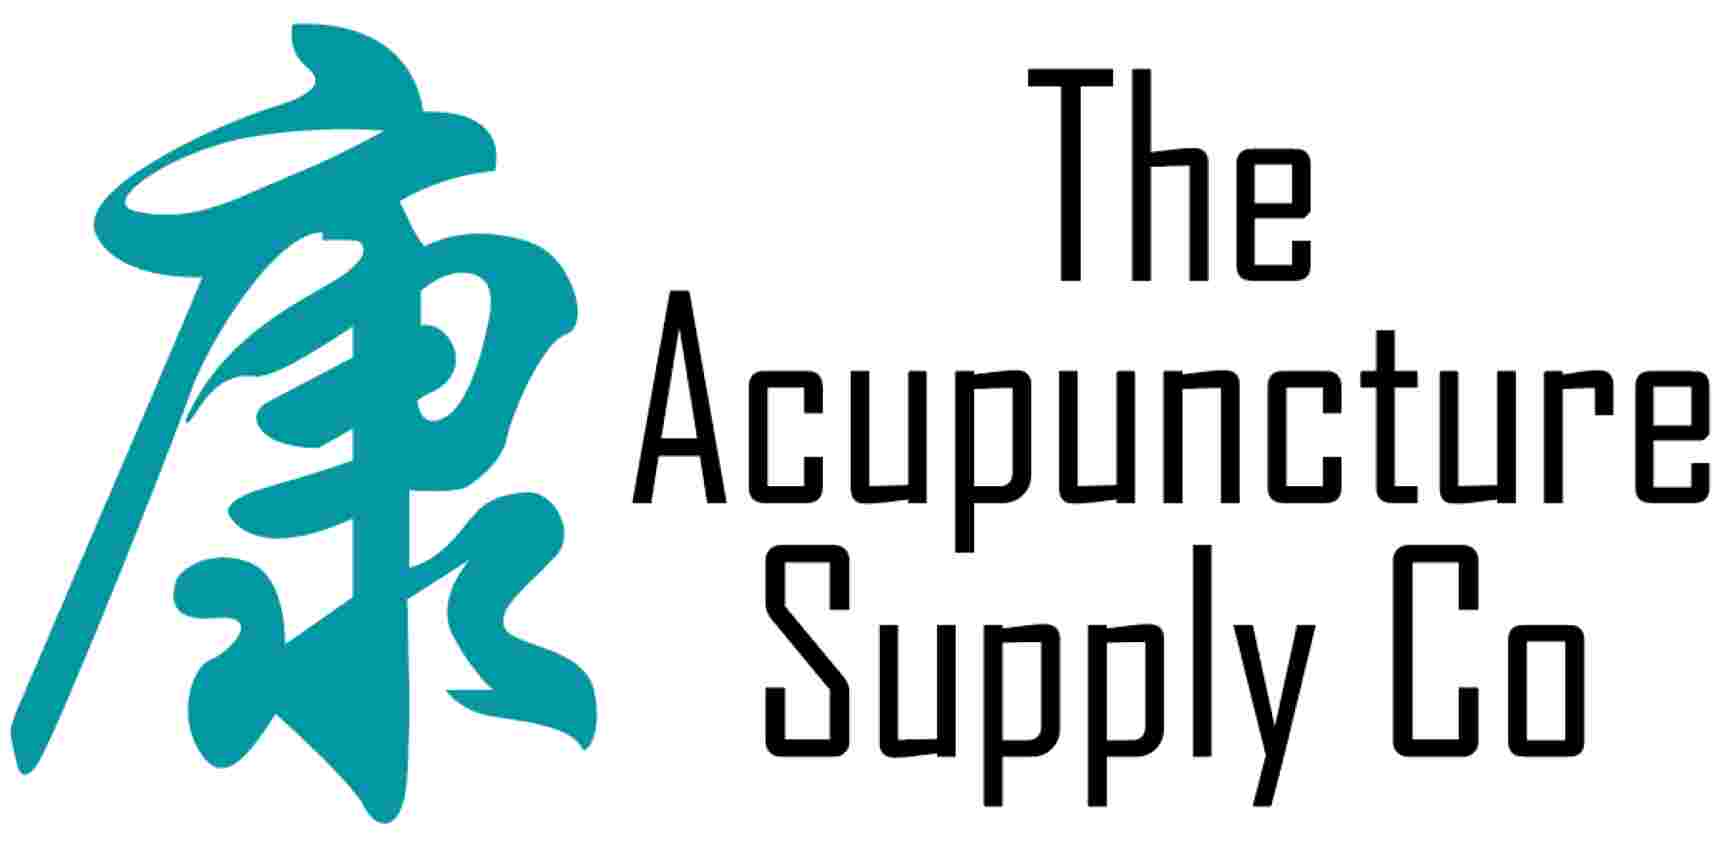 Acupuncture Needles and Supplies